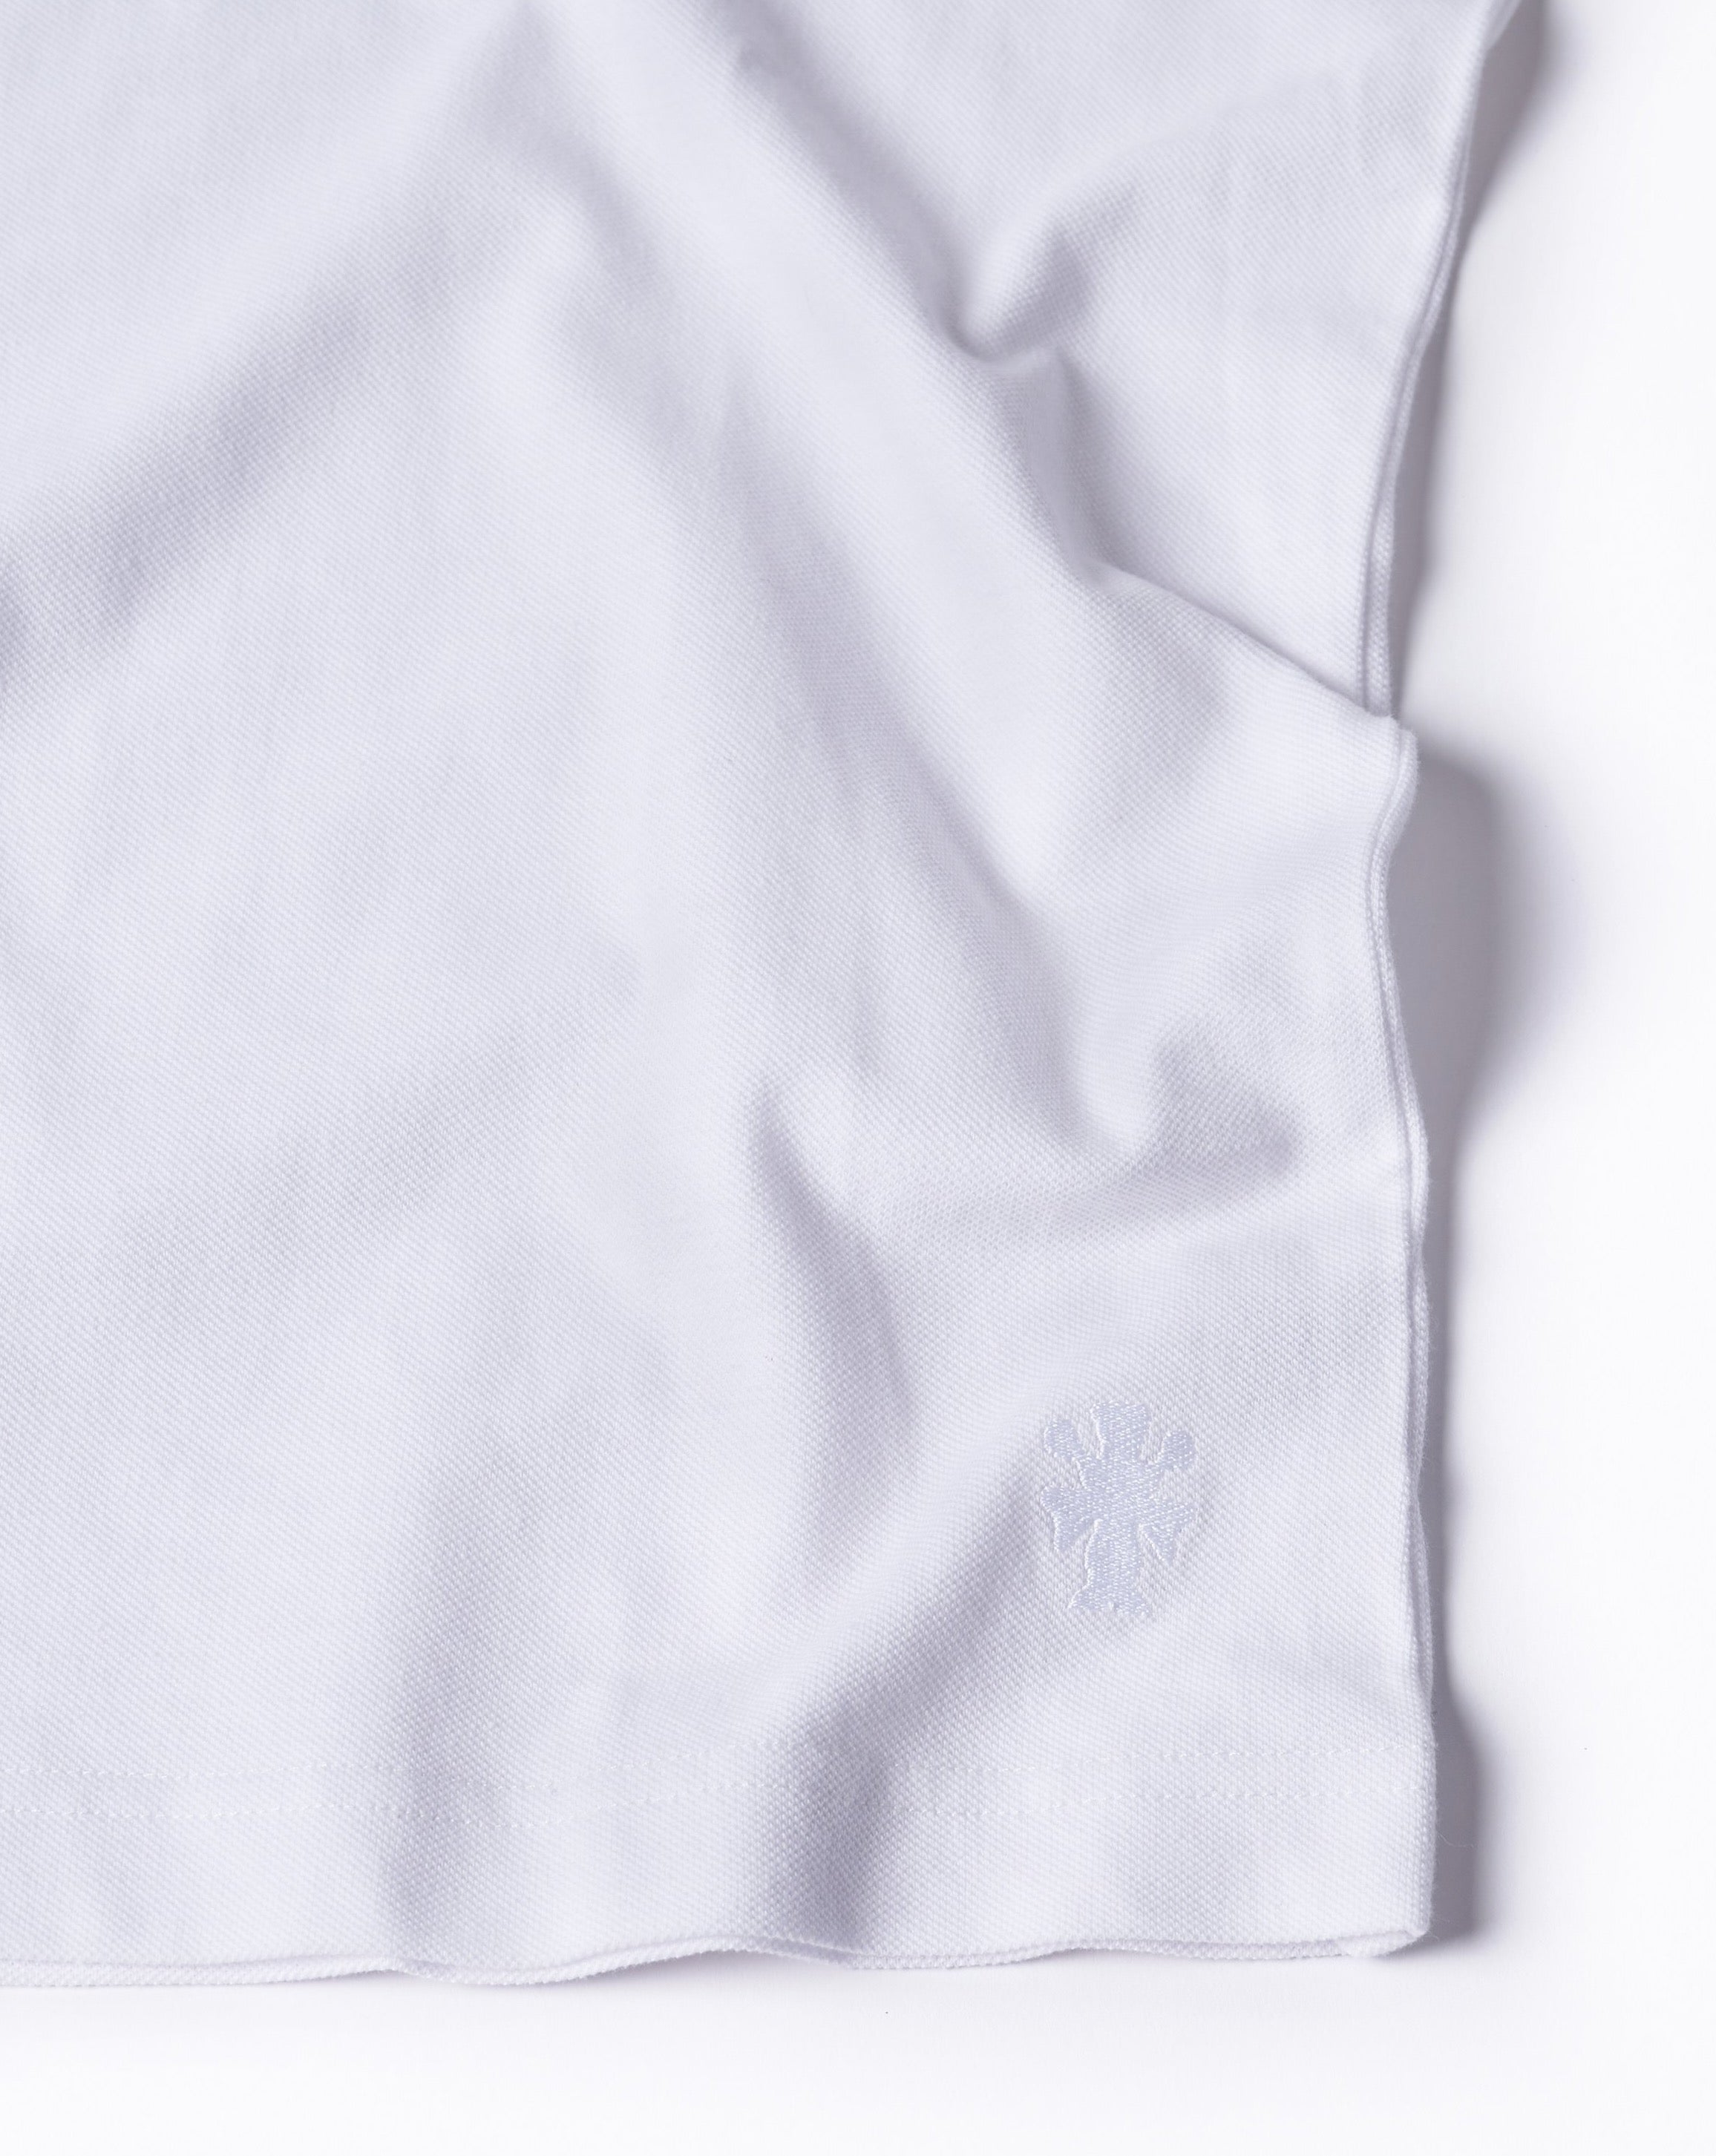 The Long Sleeve Pique Tee in Brilliant White